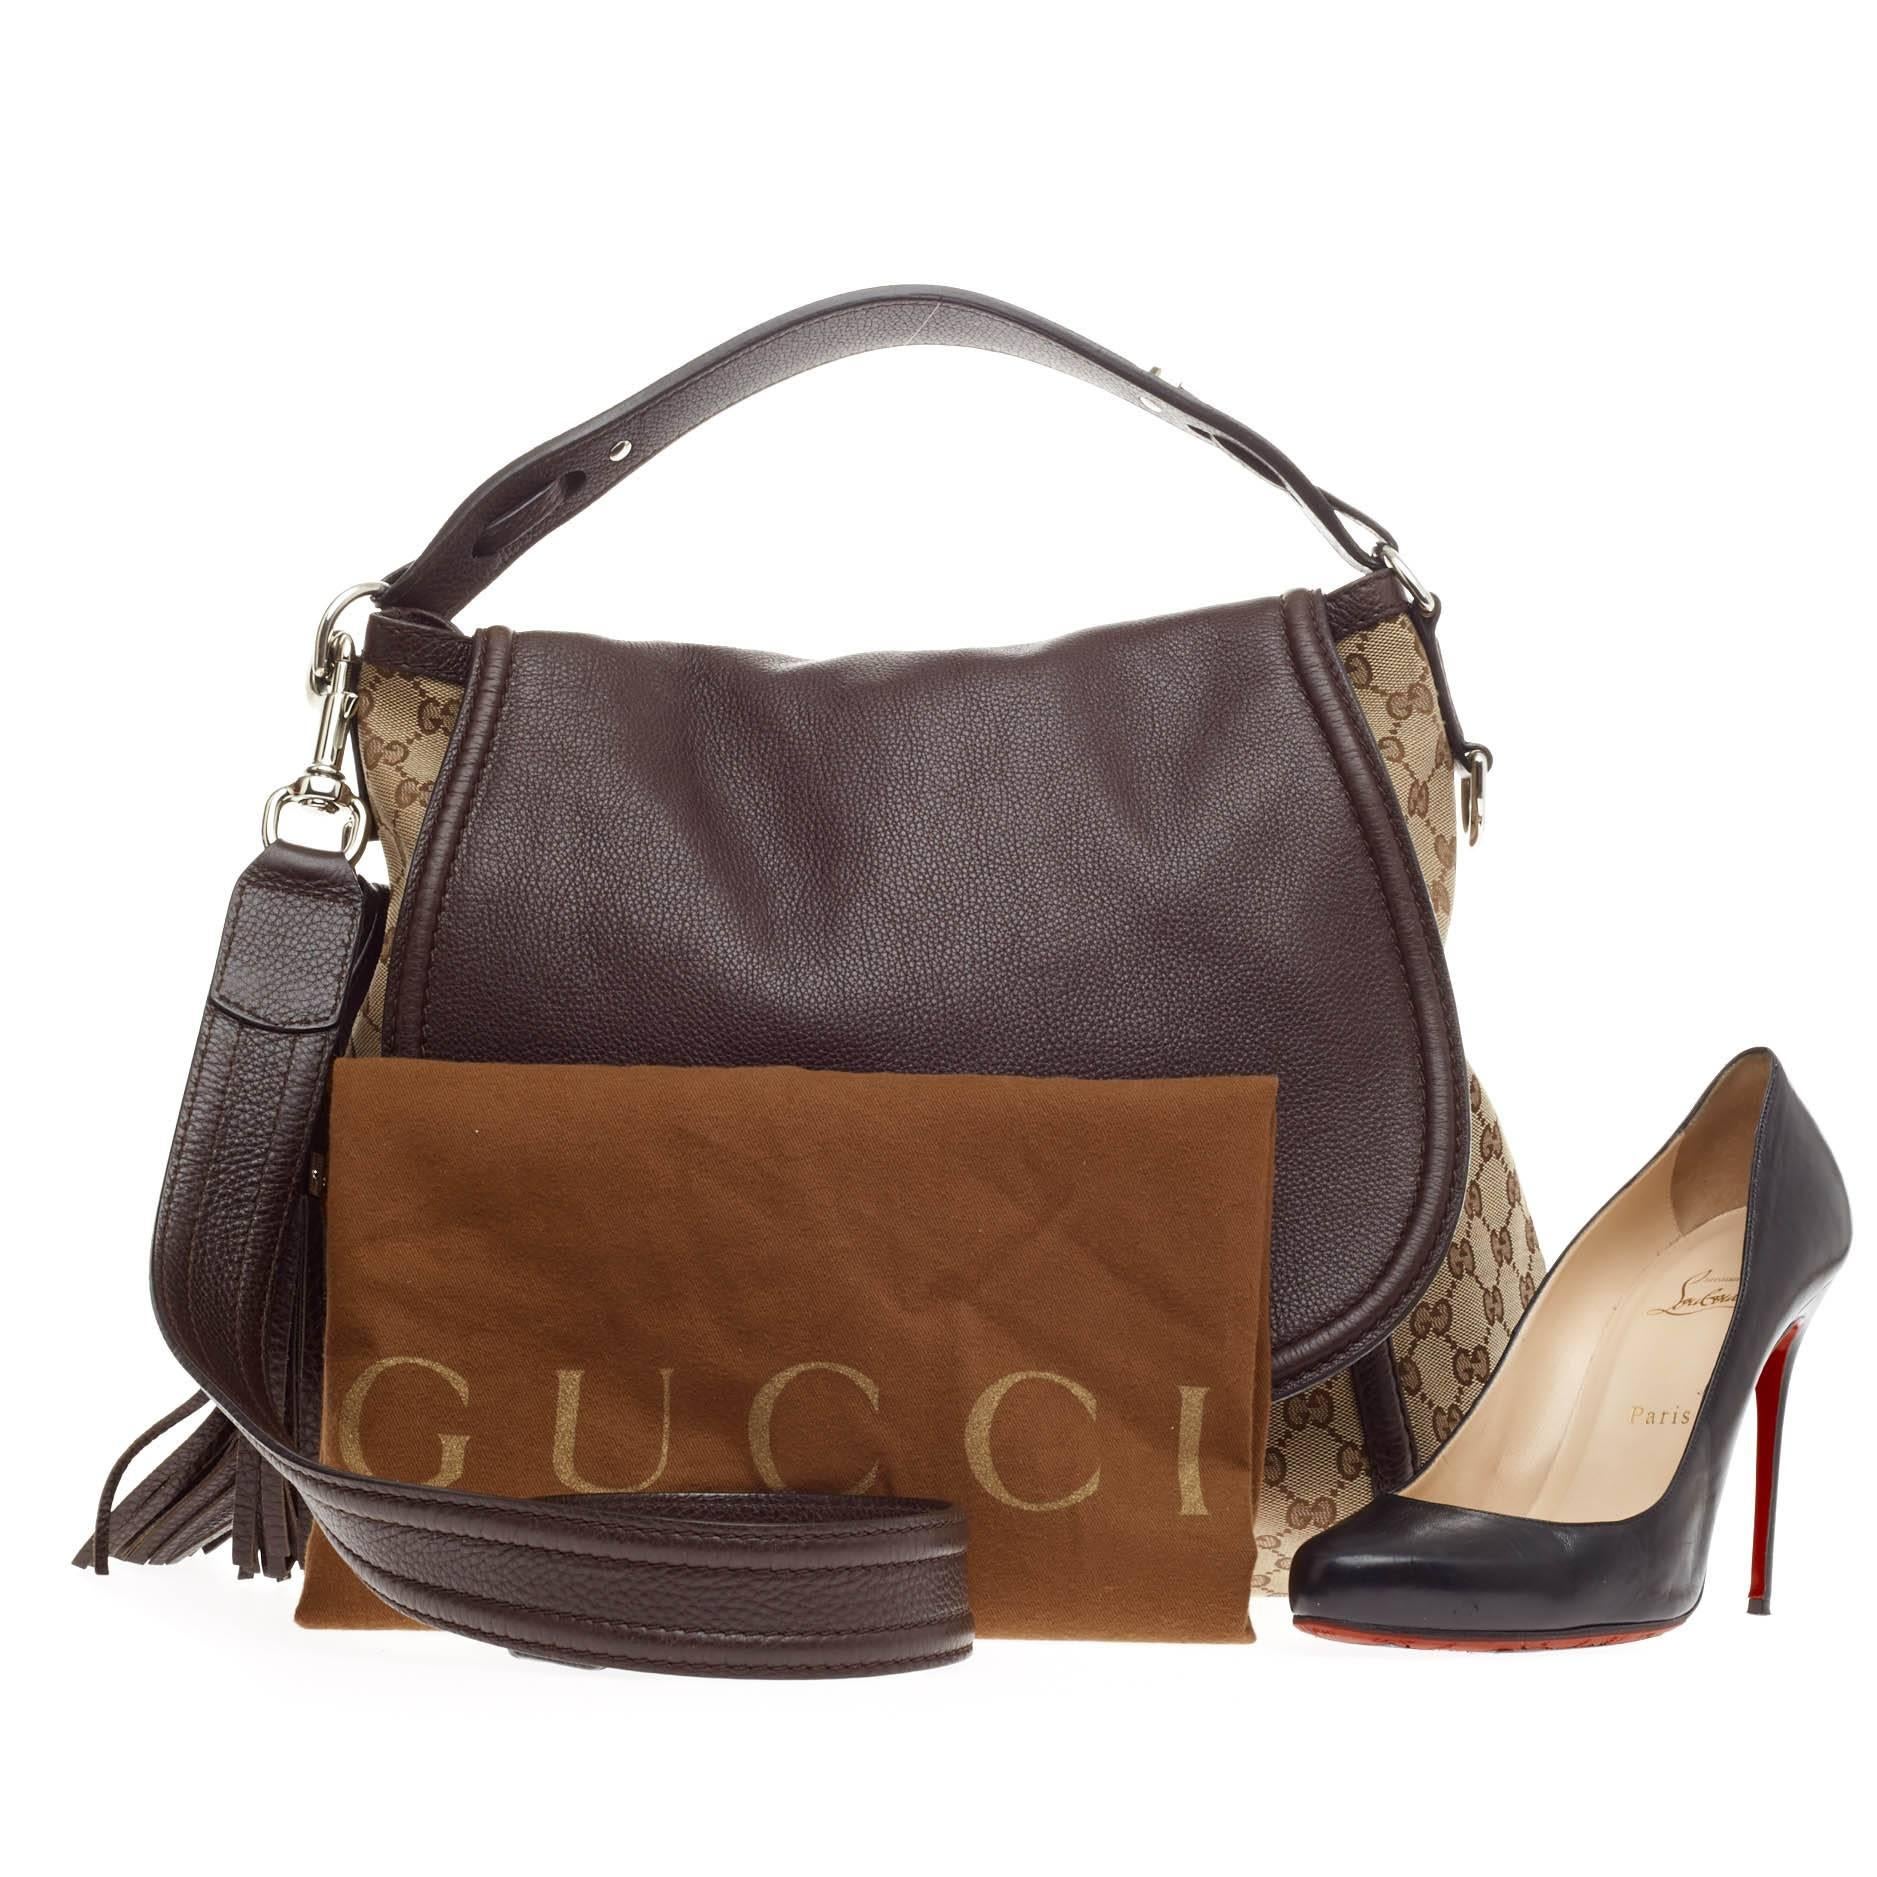 This authentic Gucci Techno Horsebit Flap Hobo Leather and GG Canvas Large is simple yet sophisticated in design perfect for modern-chic fashionistas. Crafted in brown GG canvas with brown leather, this chic hobo features Gucci's modern silver